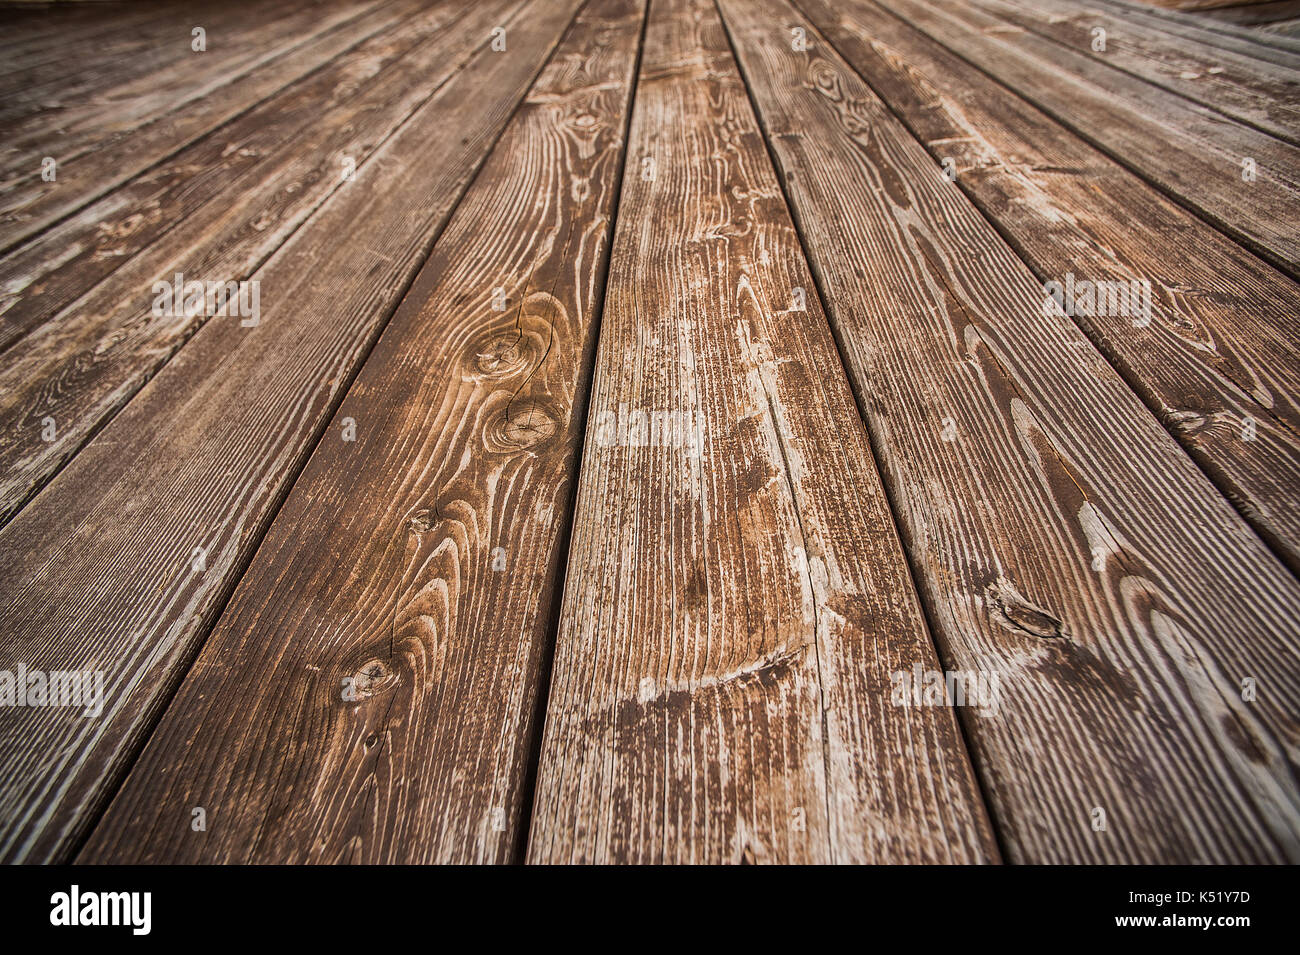 Close up of brown wooden fence panels. Wood floor texture of boards. another view Stock Photo